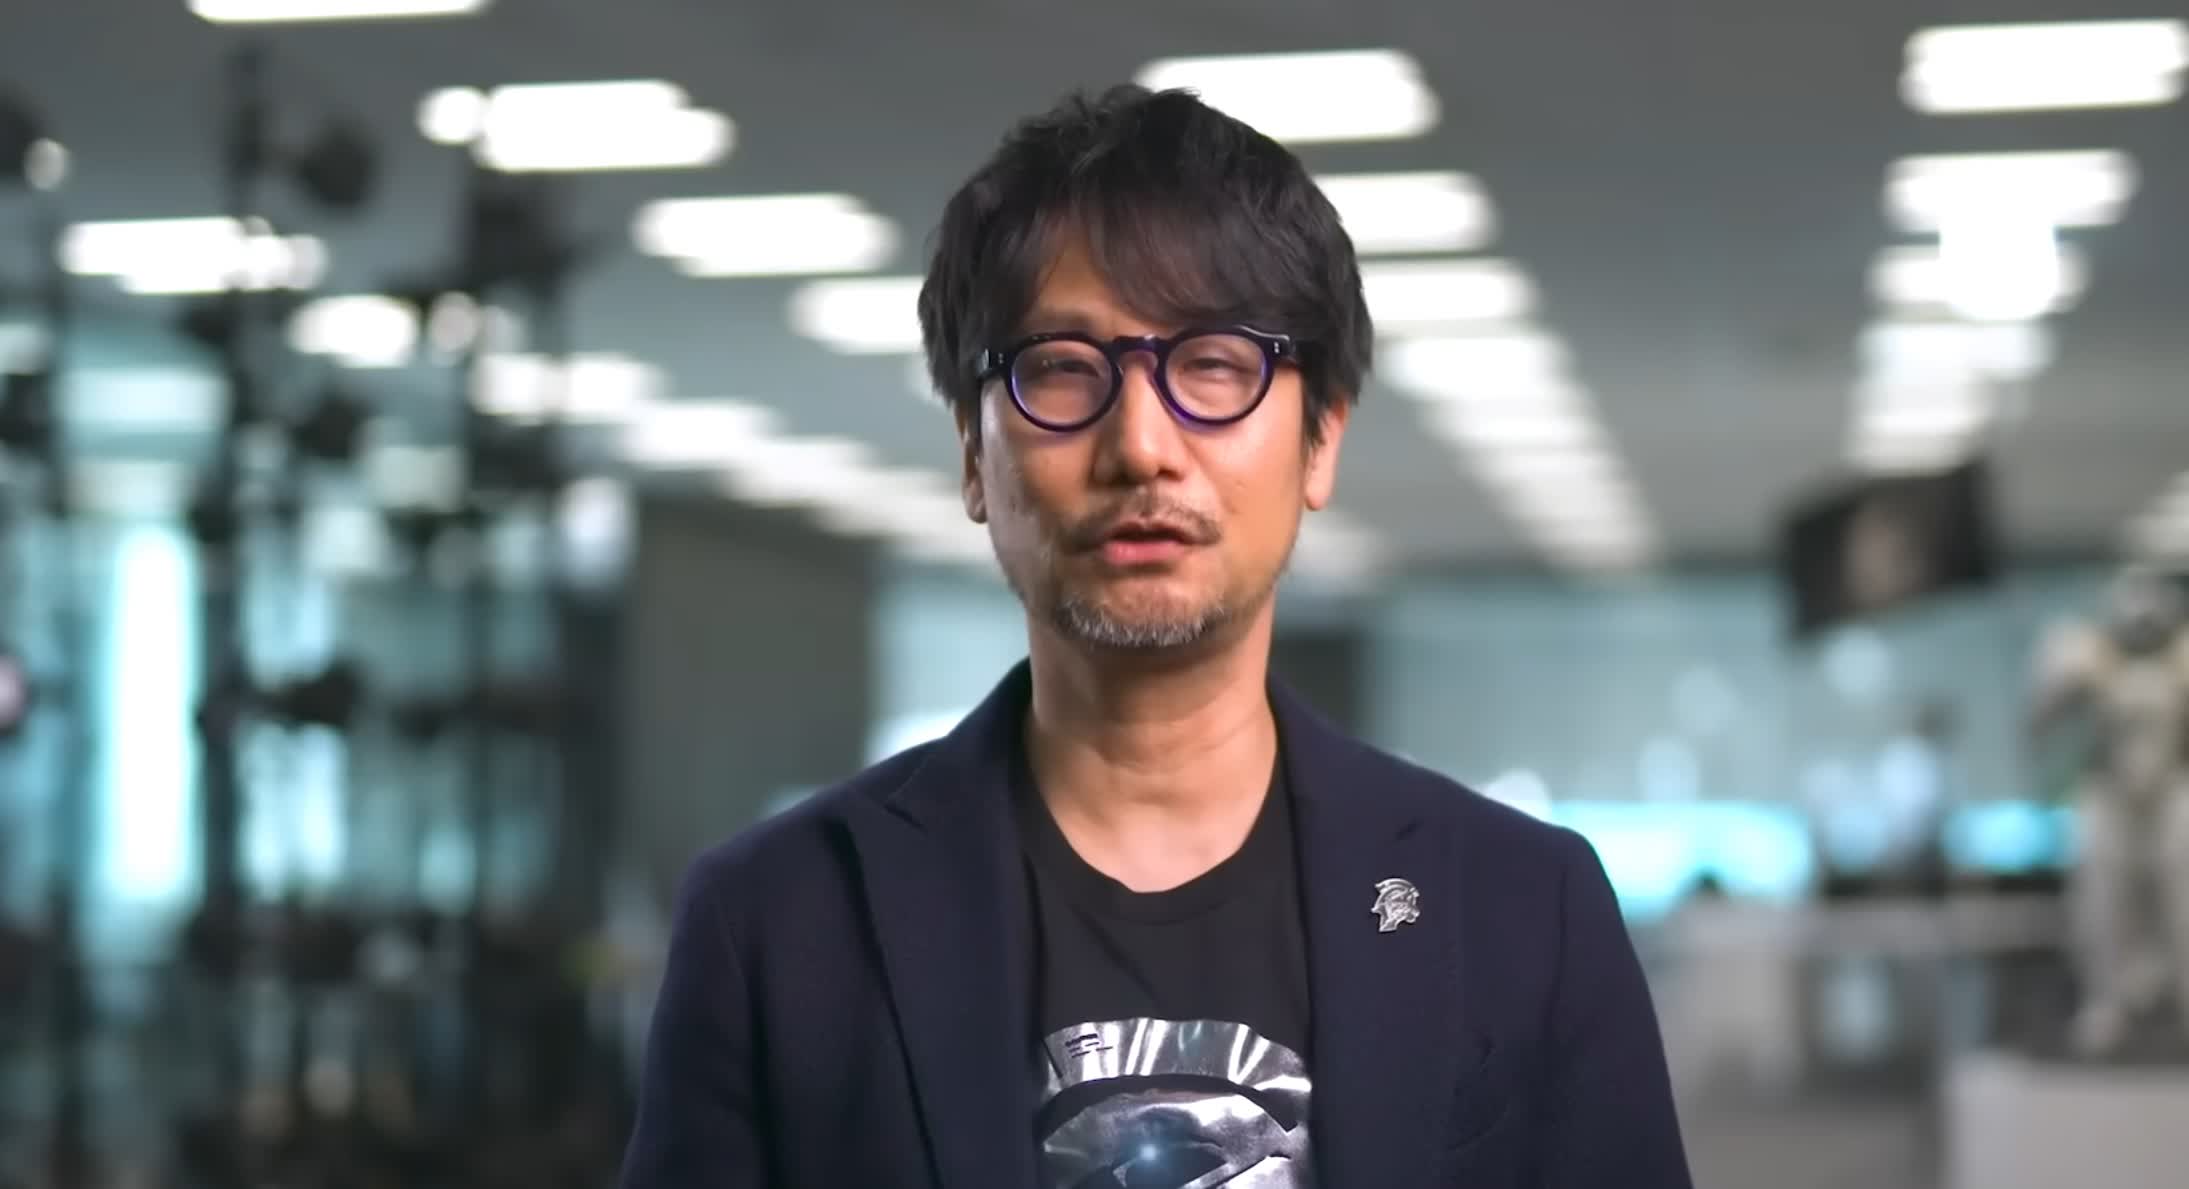 Kojima Productions considering legal action after Hideo Kojima falsely linked to assassination of Shinzo Abe